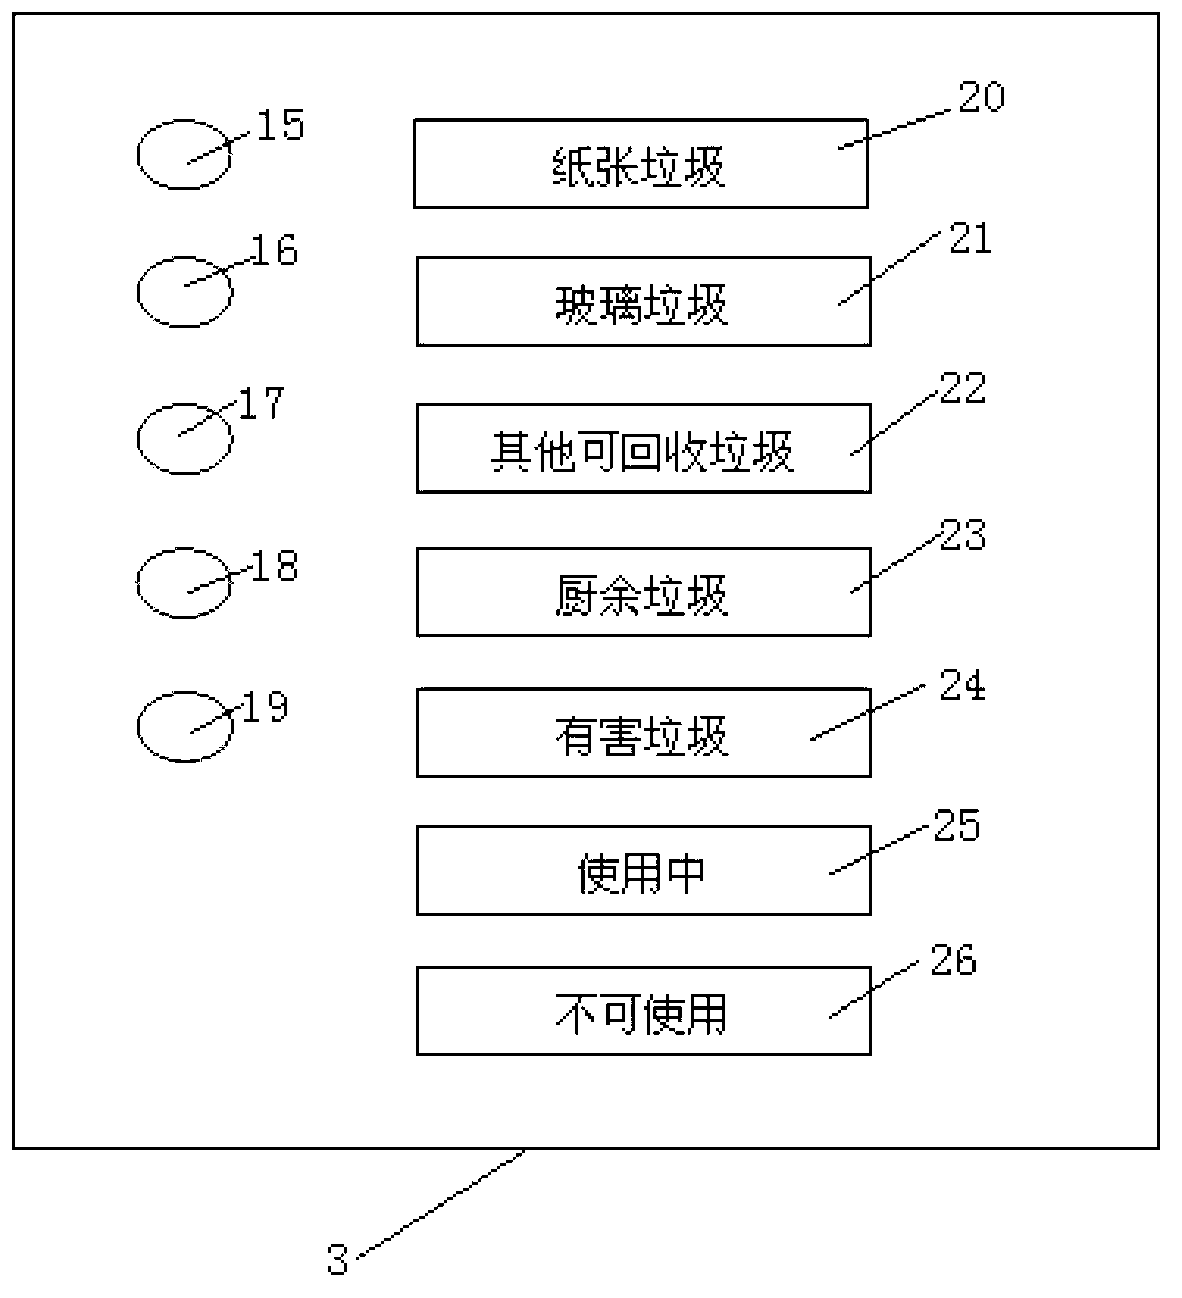 Garbage classification and collection system for high-rise building